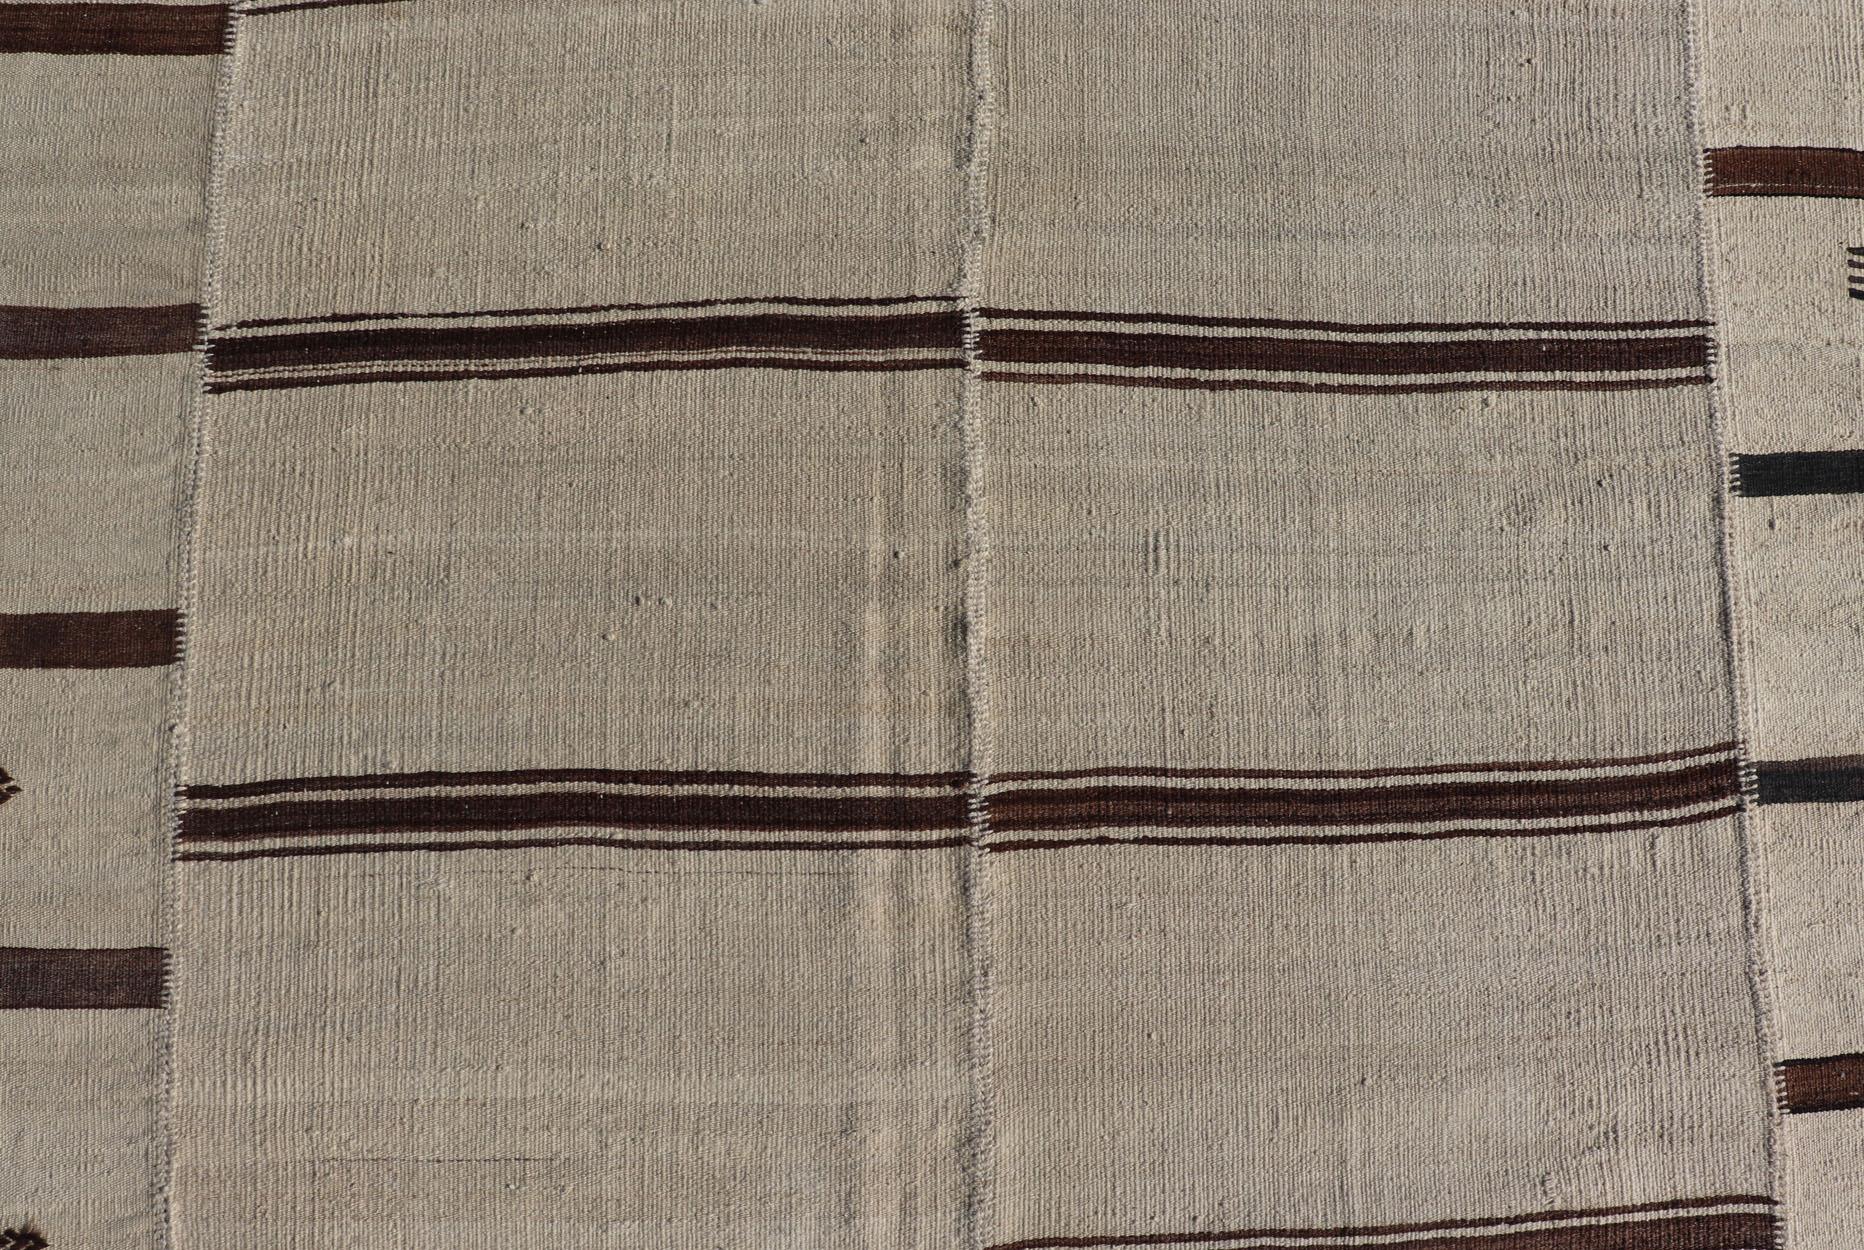 Large Vintage Hand Woven Neutral Paneled Kilim Flat-Weave in Tones of Cream and Brown.

Measures: 13'3 x 18'1

Large Vintage Hand Woven neutral paneled Kilim flat-weave in tones of cream and brown in stripe design  kwarugs, Casual flat-weave Kilim